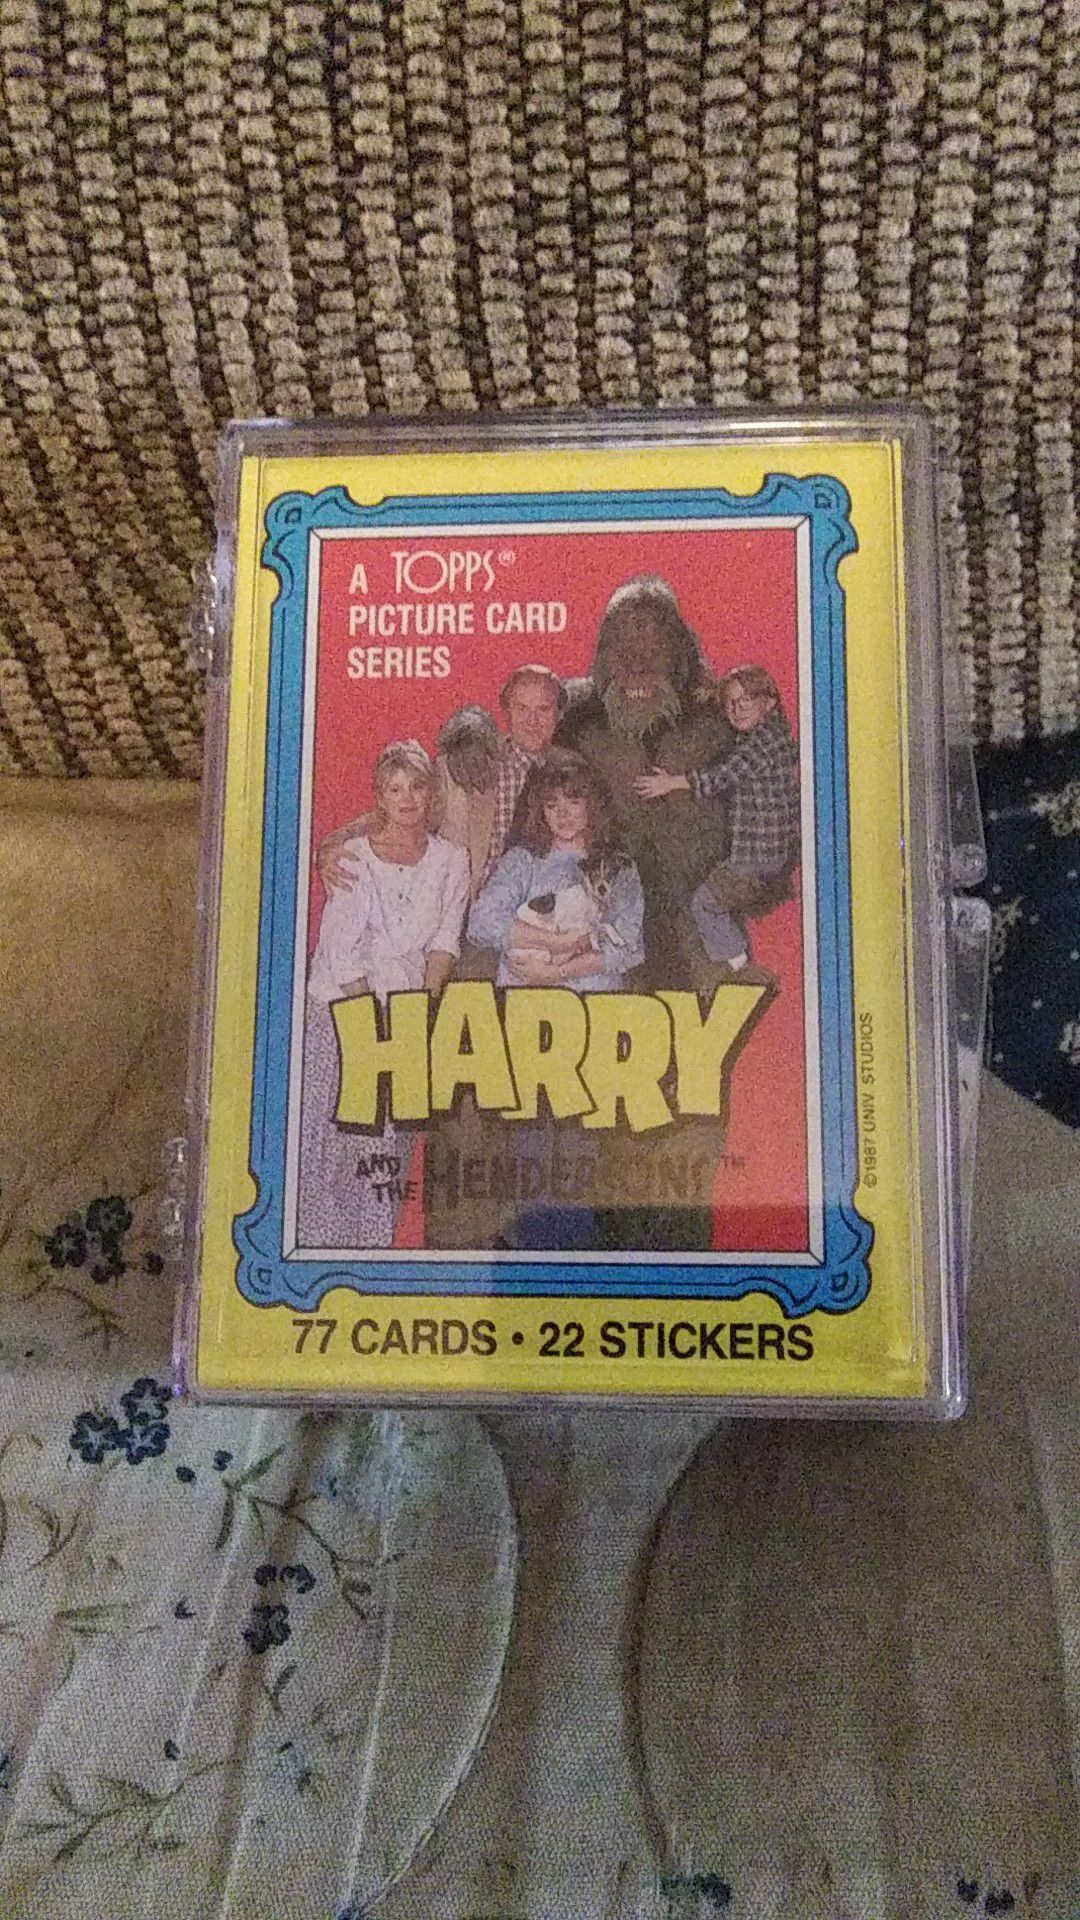 1987 Topps Harry and the Henderson's complete set cards